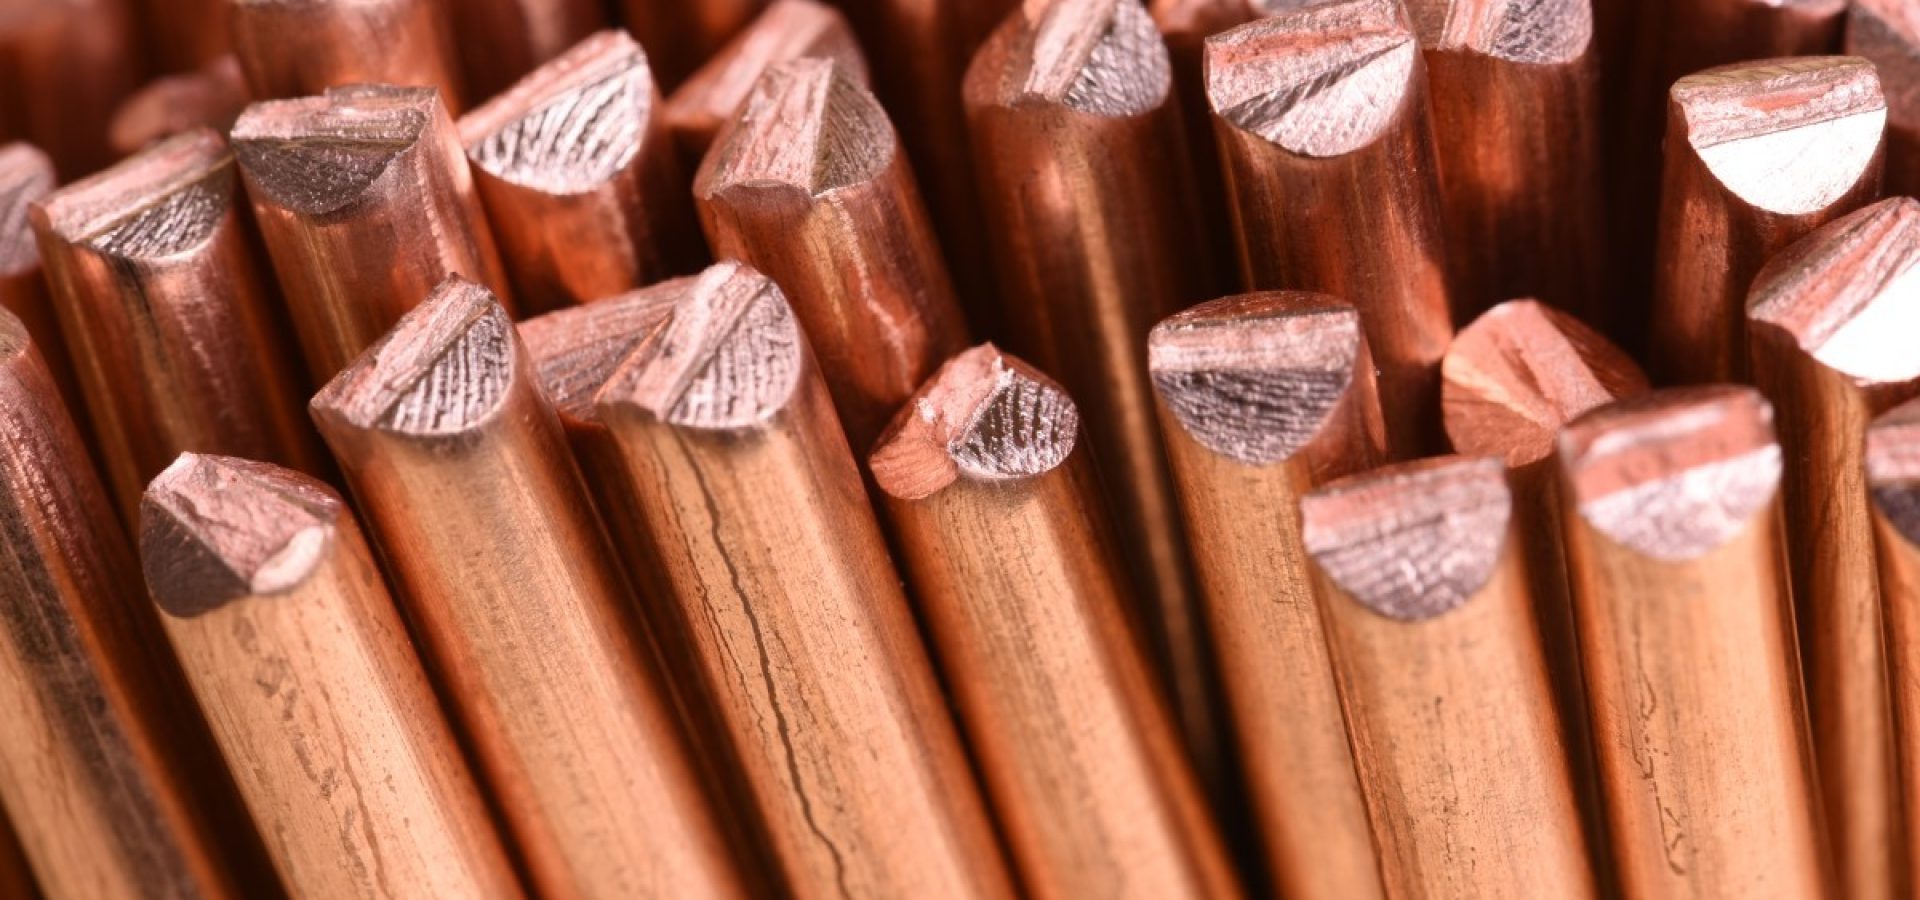 The copper price hasn't been so low for the last four years